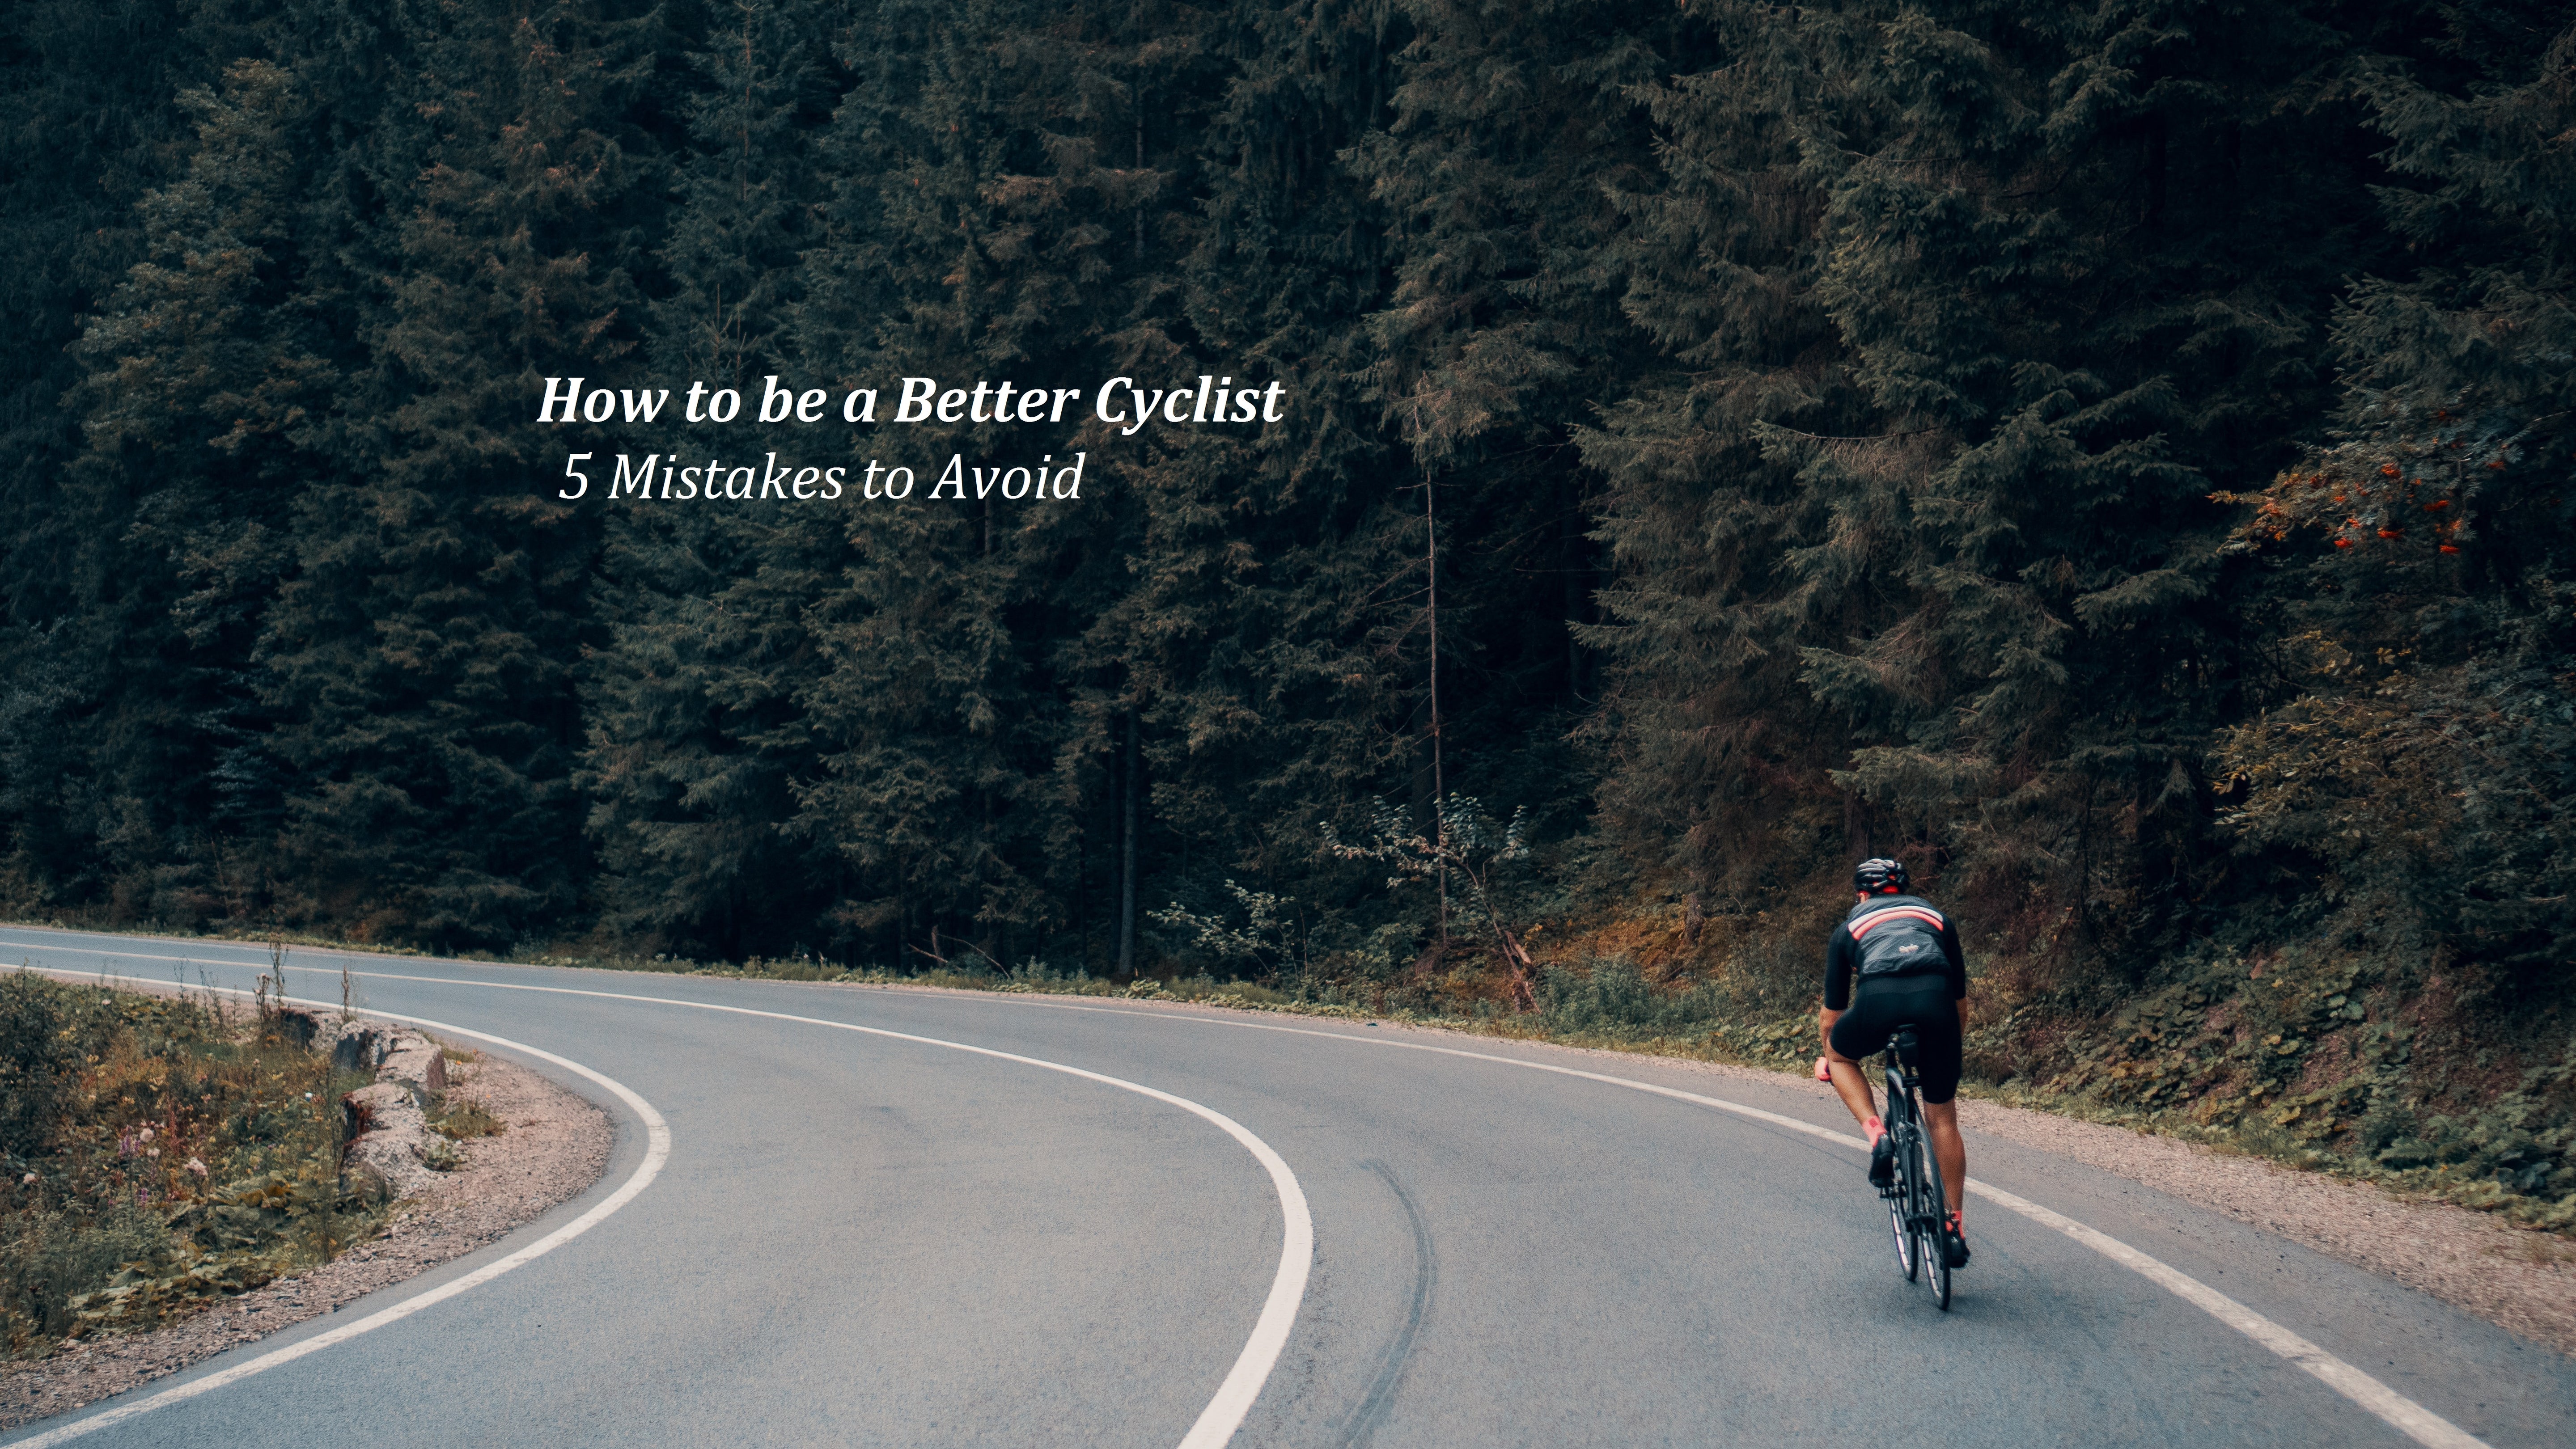 How to be a Better Cyclist